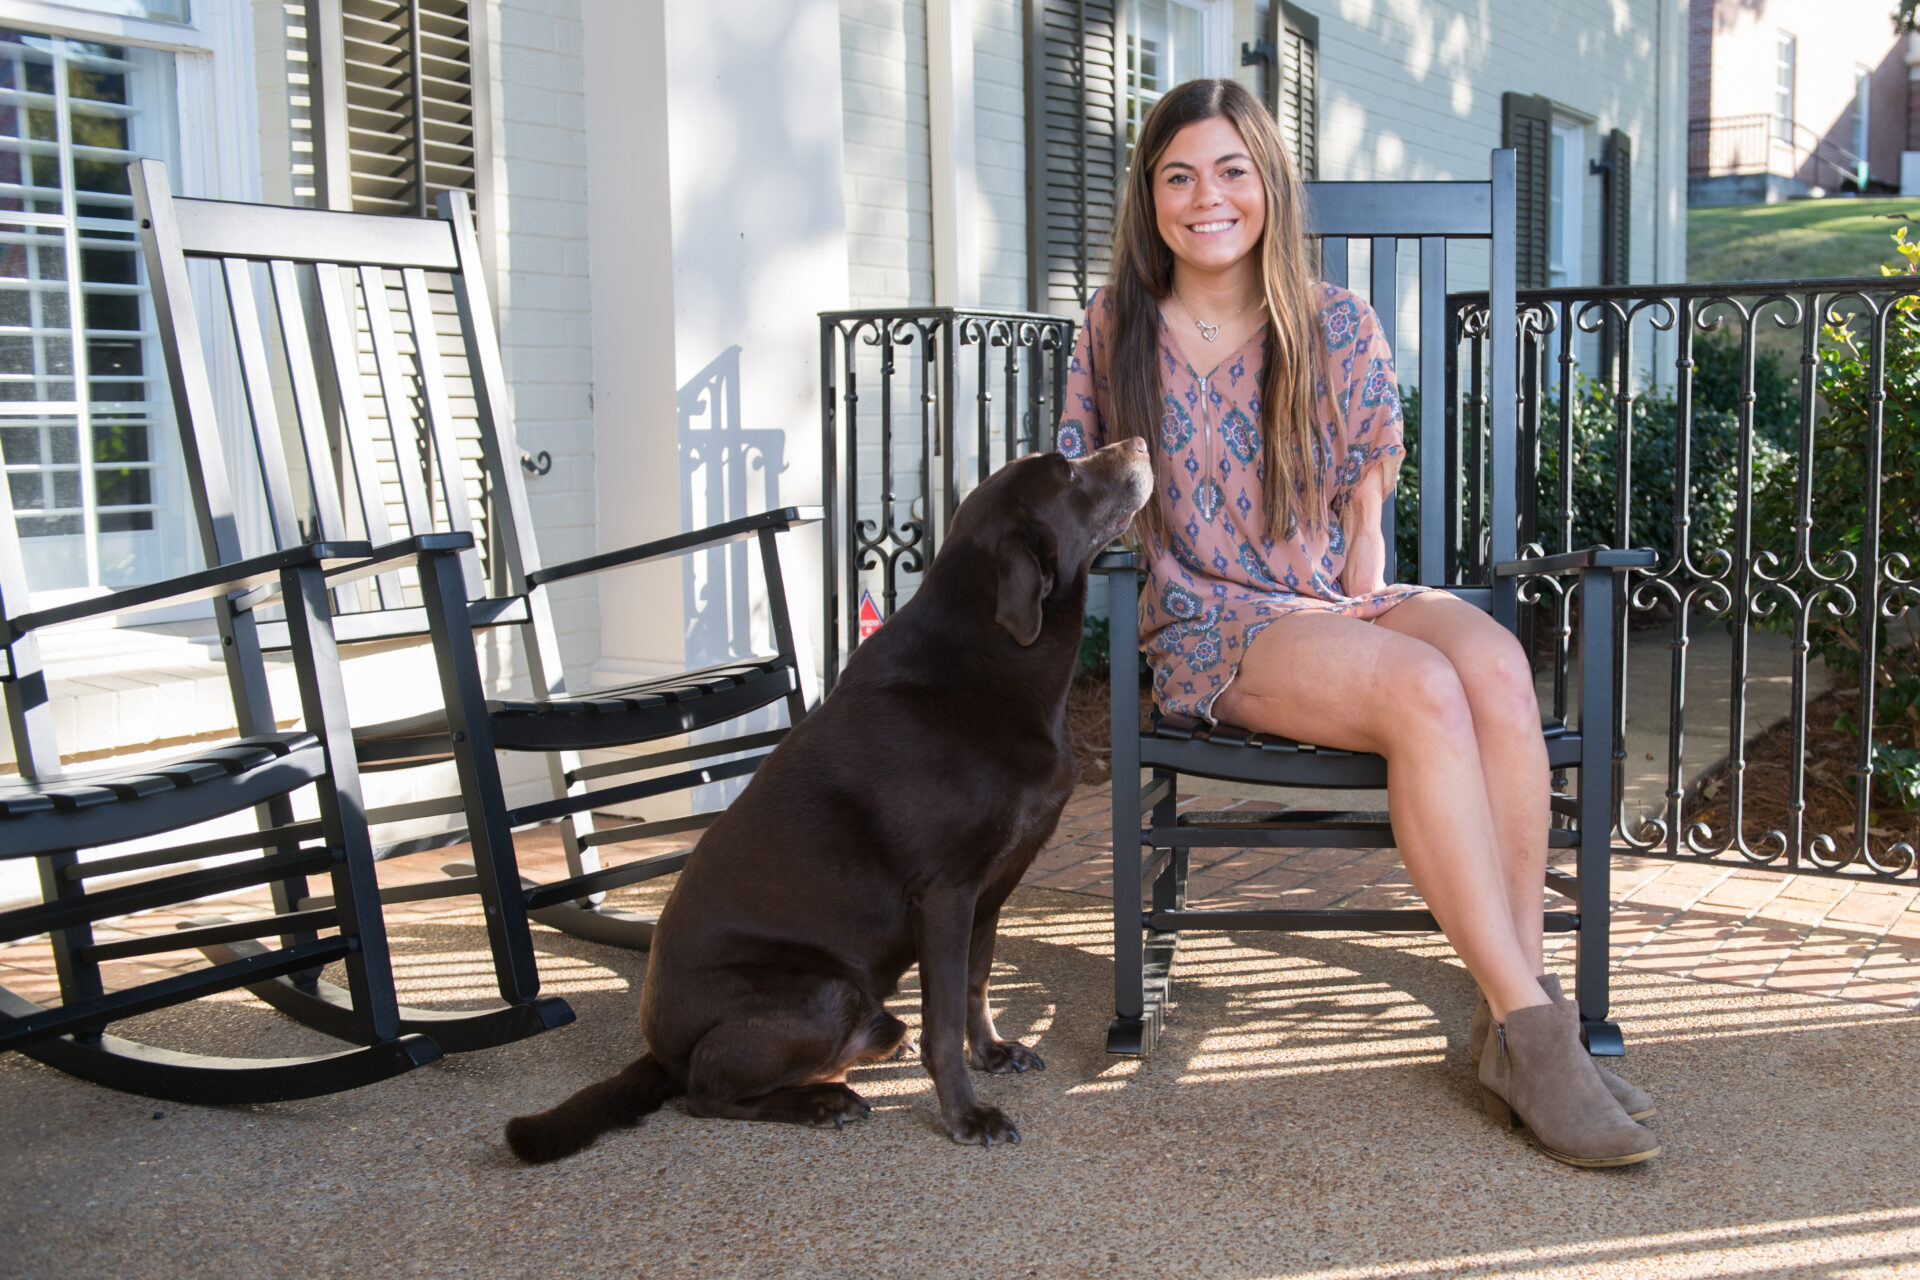 Madysen Acey, Aided by a Service Dog and a Famous Surfer's Camp, Perseveres  after Double Amputation 